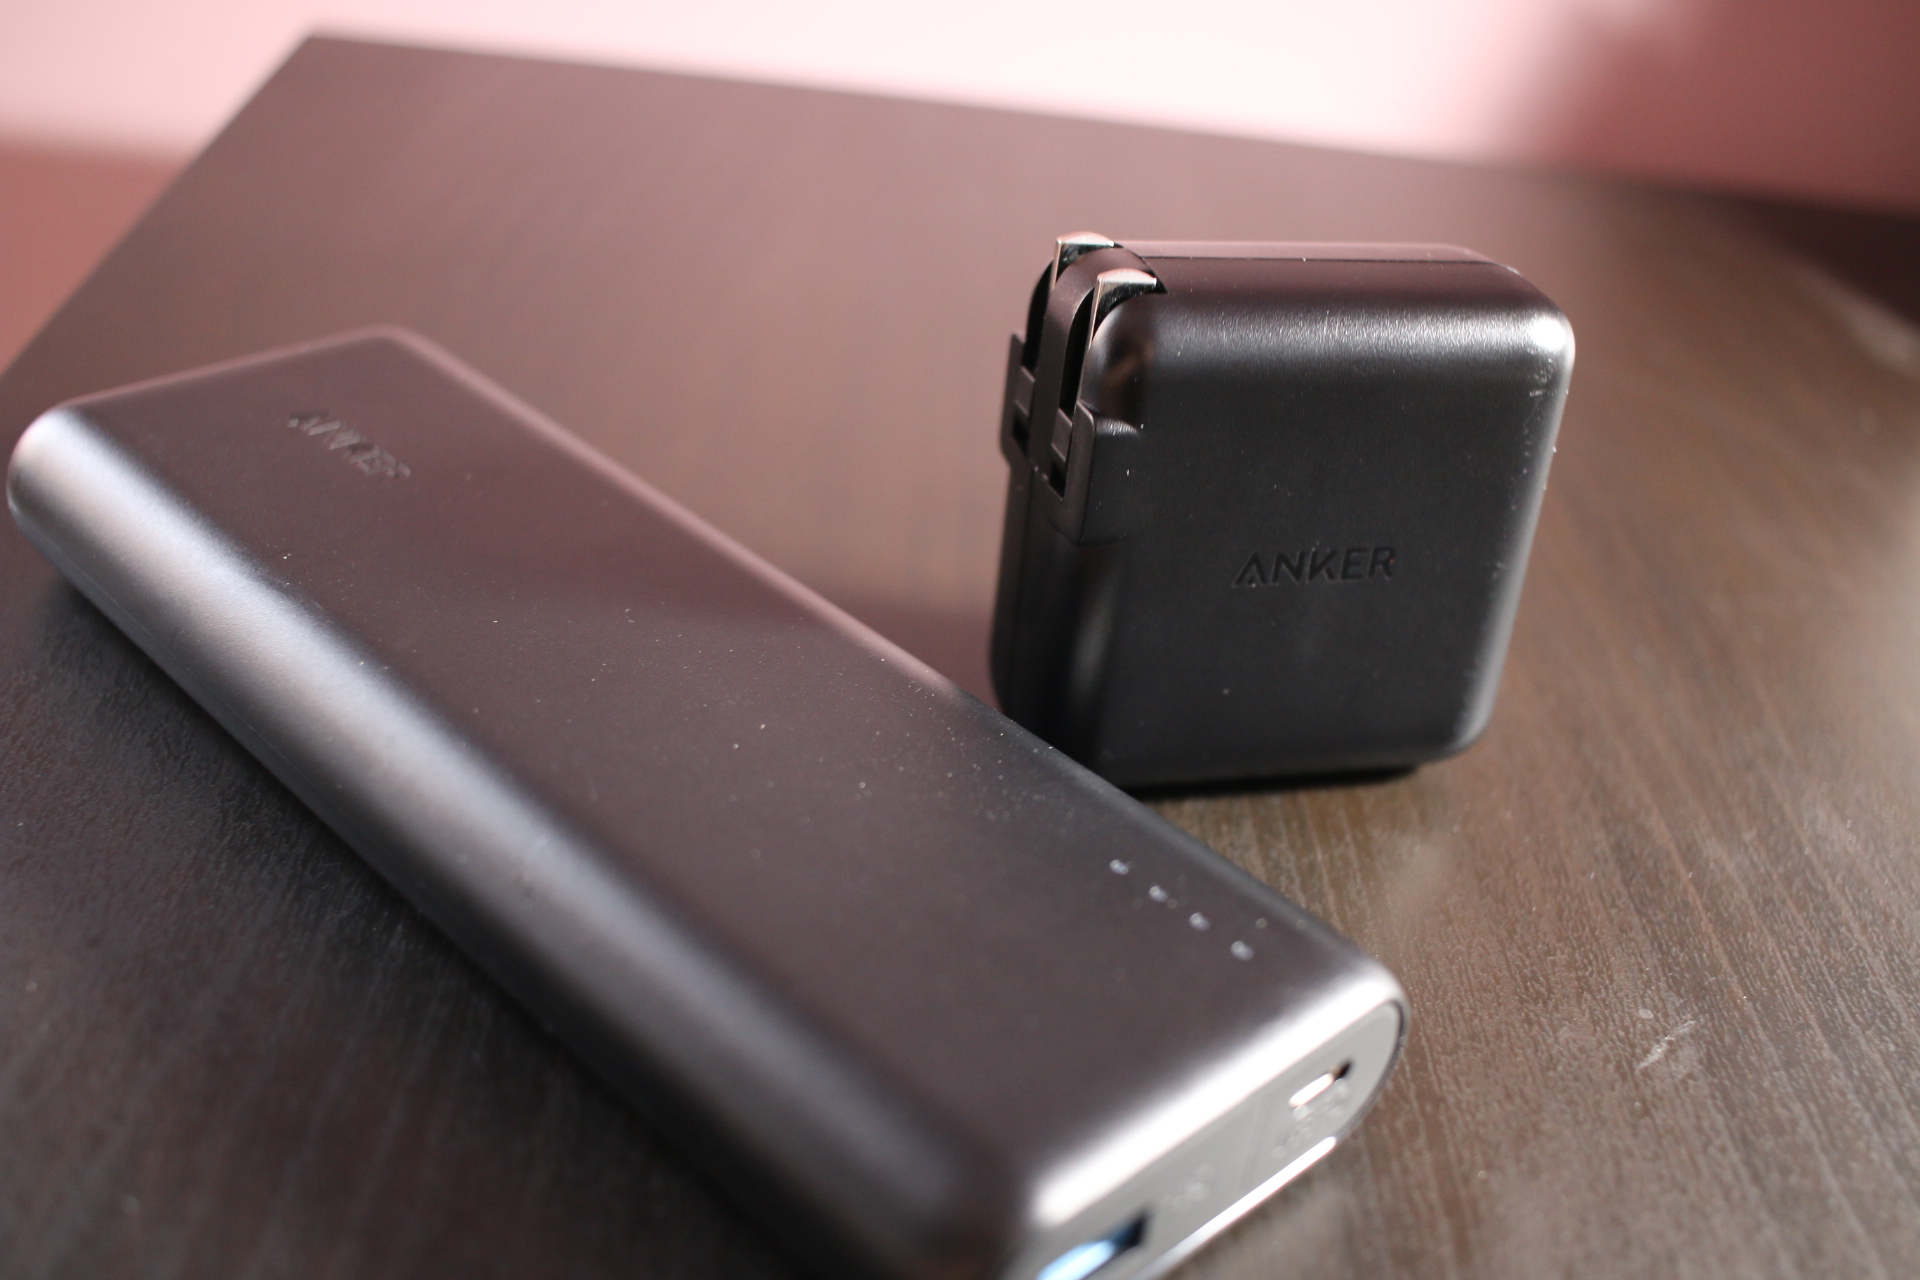 The Anker PowerCore PD is the portable charger need